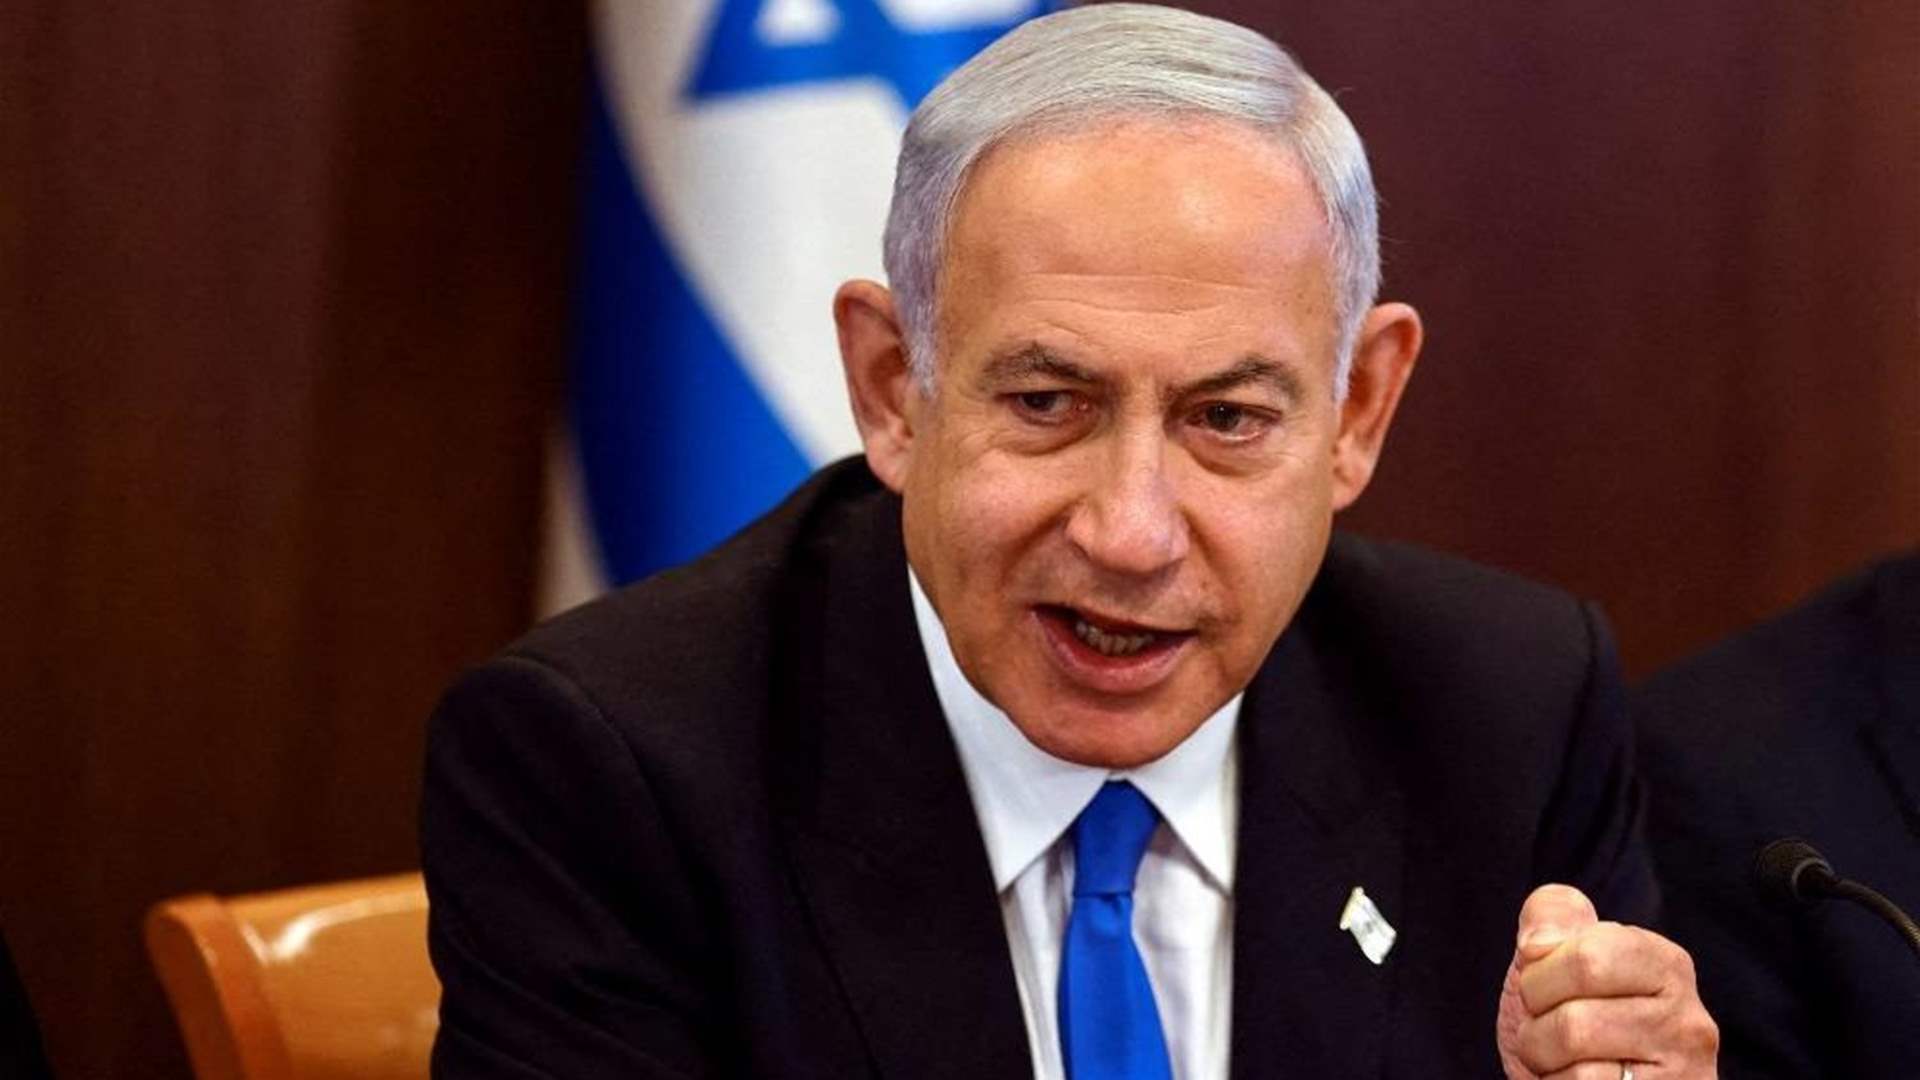 Netanyahu: There is no place in Gaza we will not reach